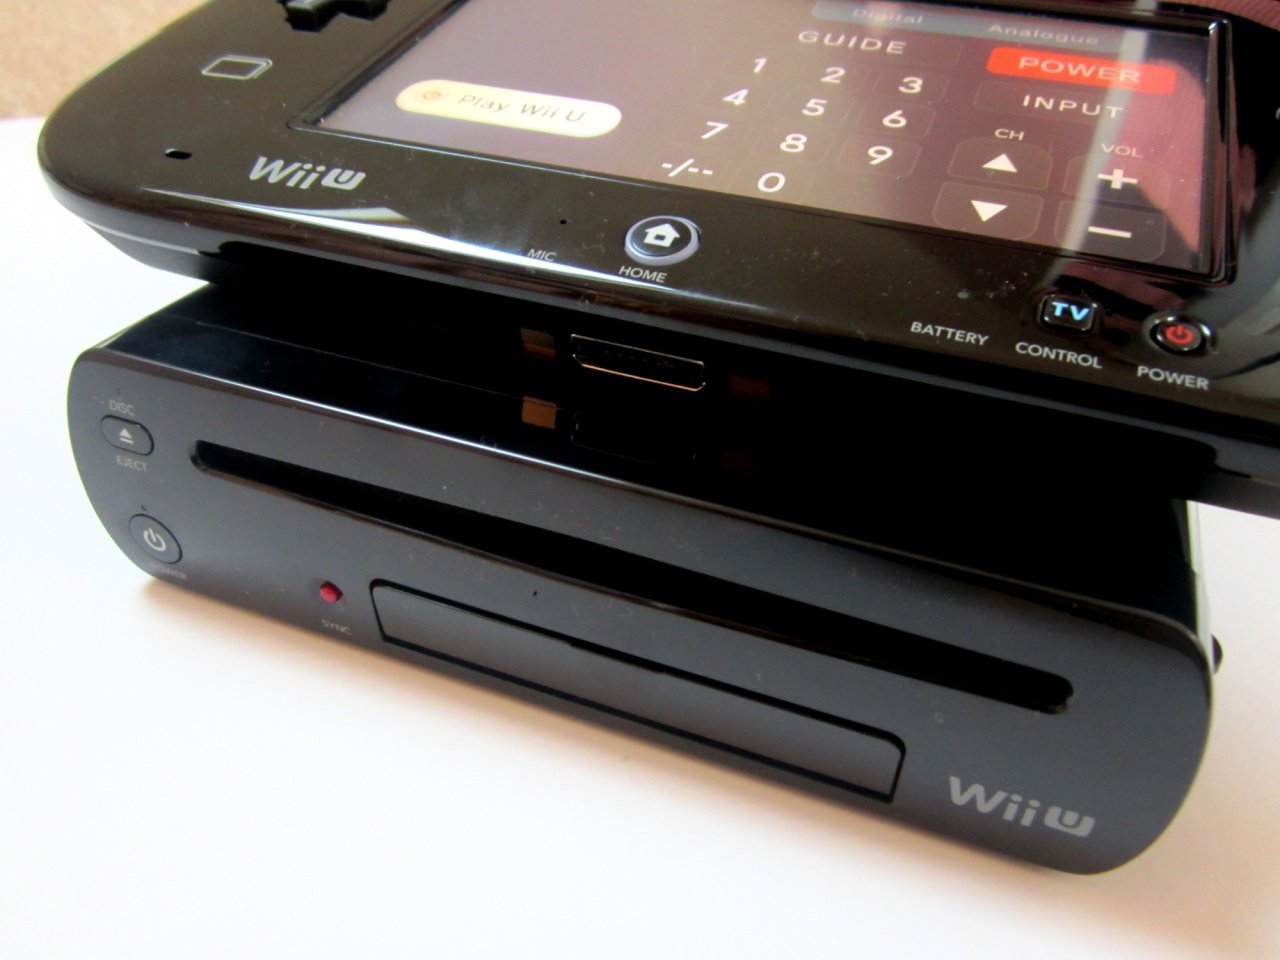 A Wii U owner's send-off to a deeply flawed but essential Nintendo